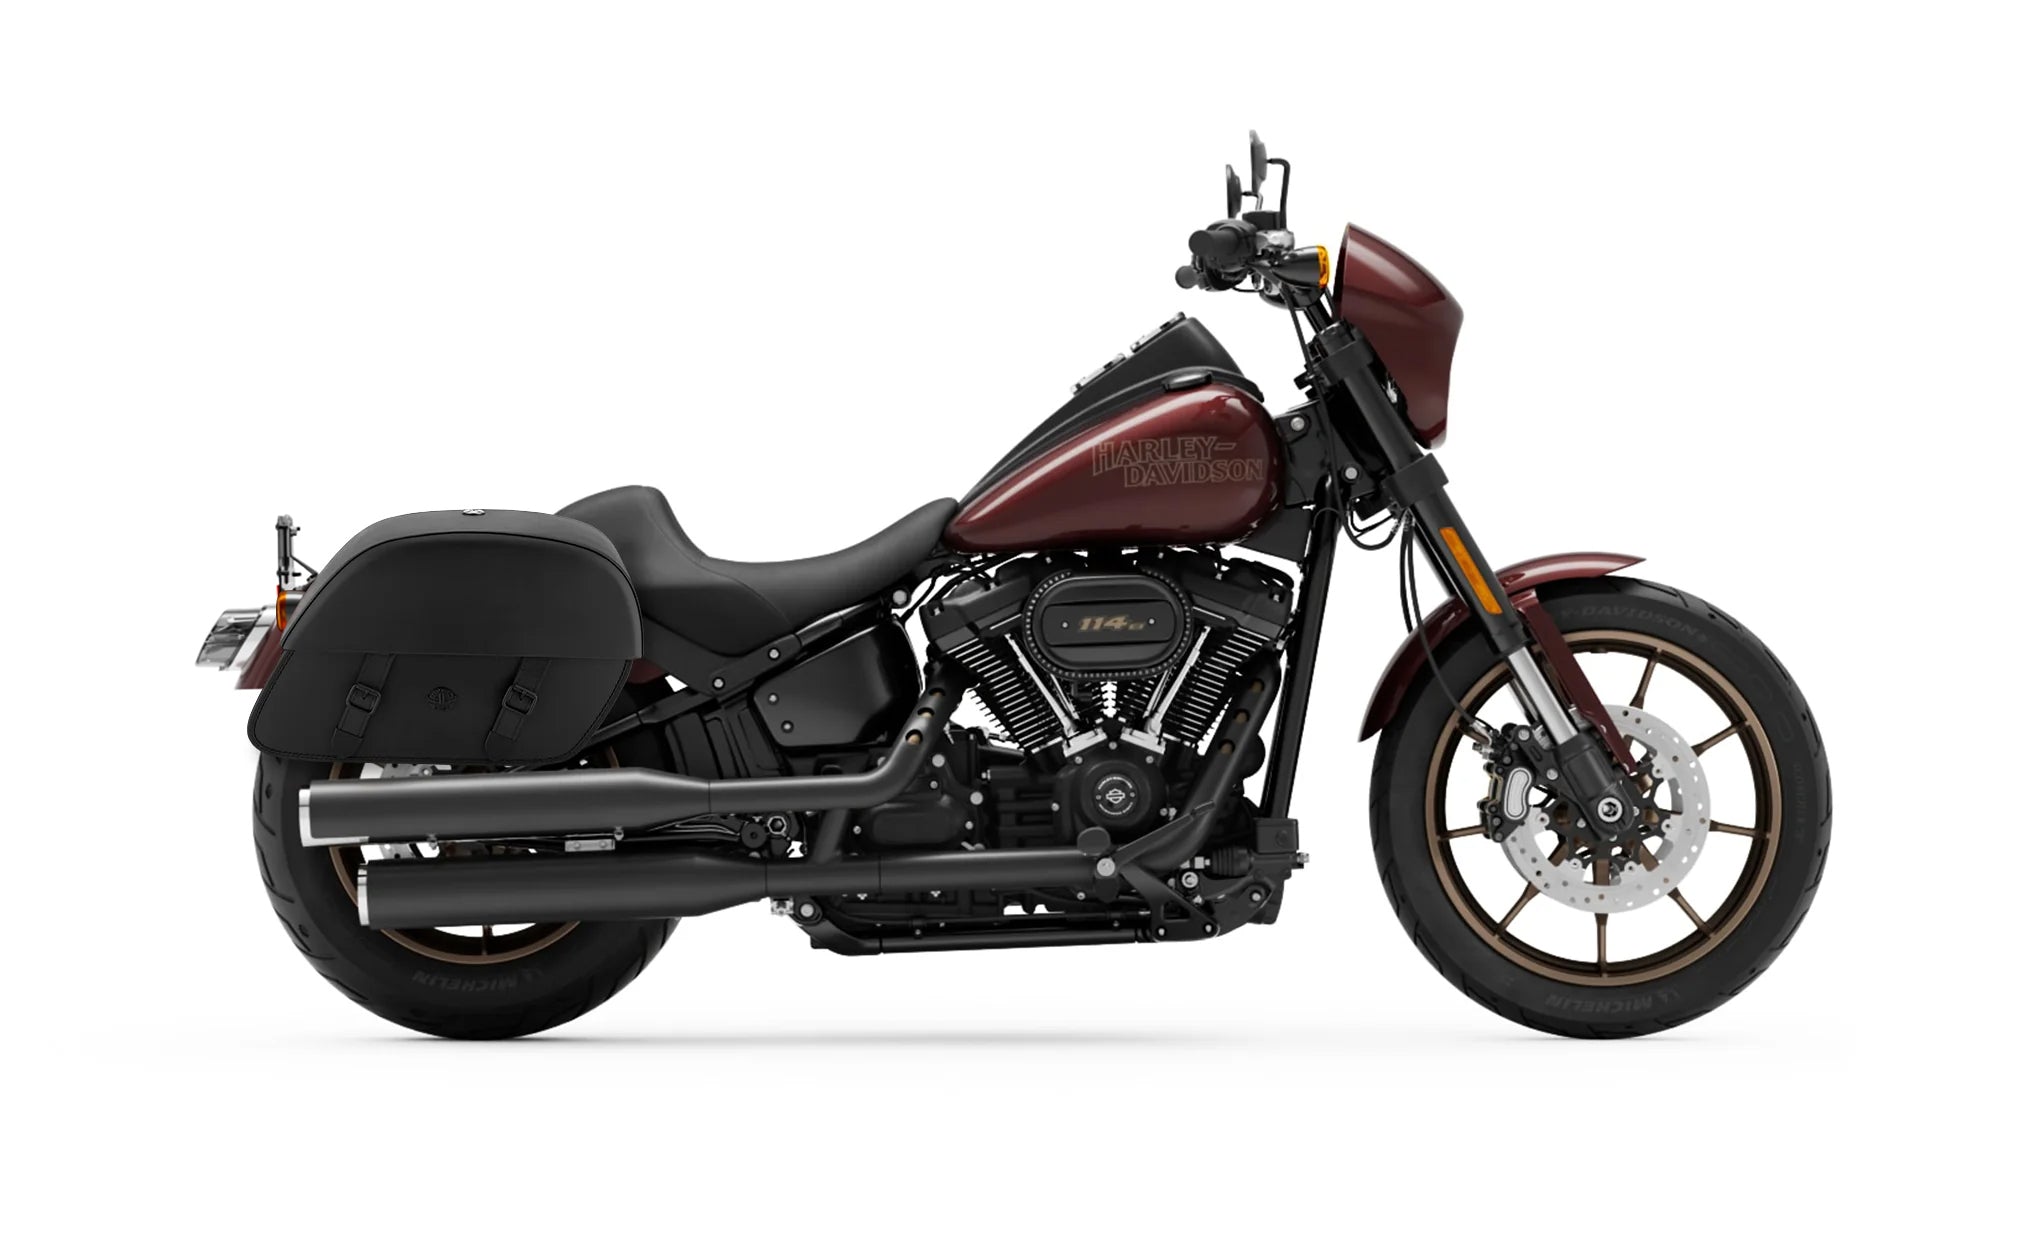 Viking Baelor Large Leather Motorcycle Saddlebags For Harley Davidson Softail Low Rider S Fxlrs on Bike Photo @expand